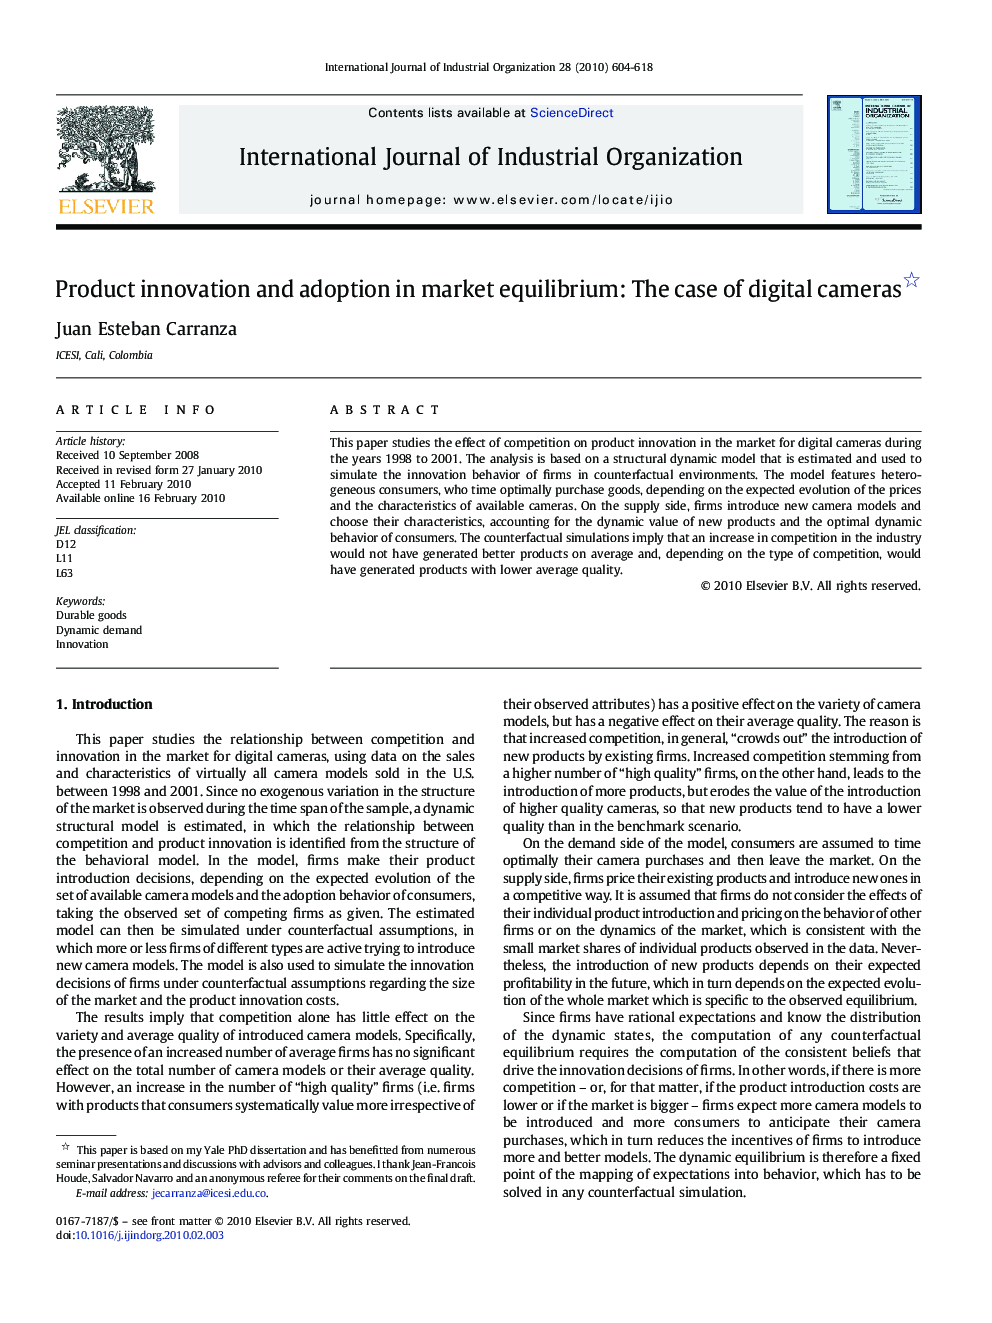 Product innovation and adoption in market equilibrium: The case of digital cameras